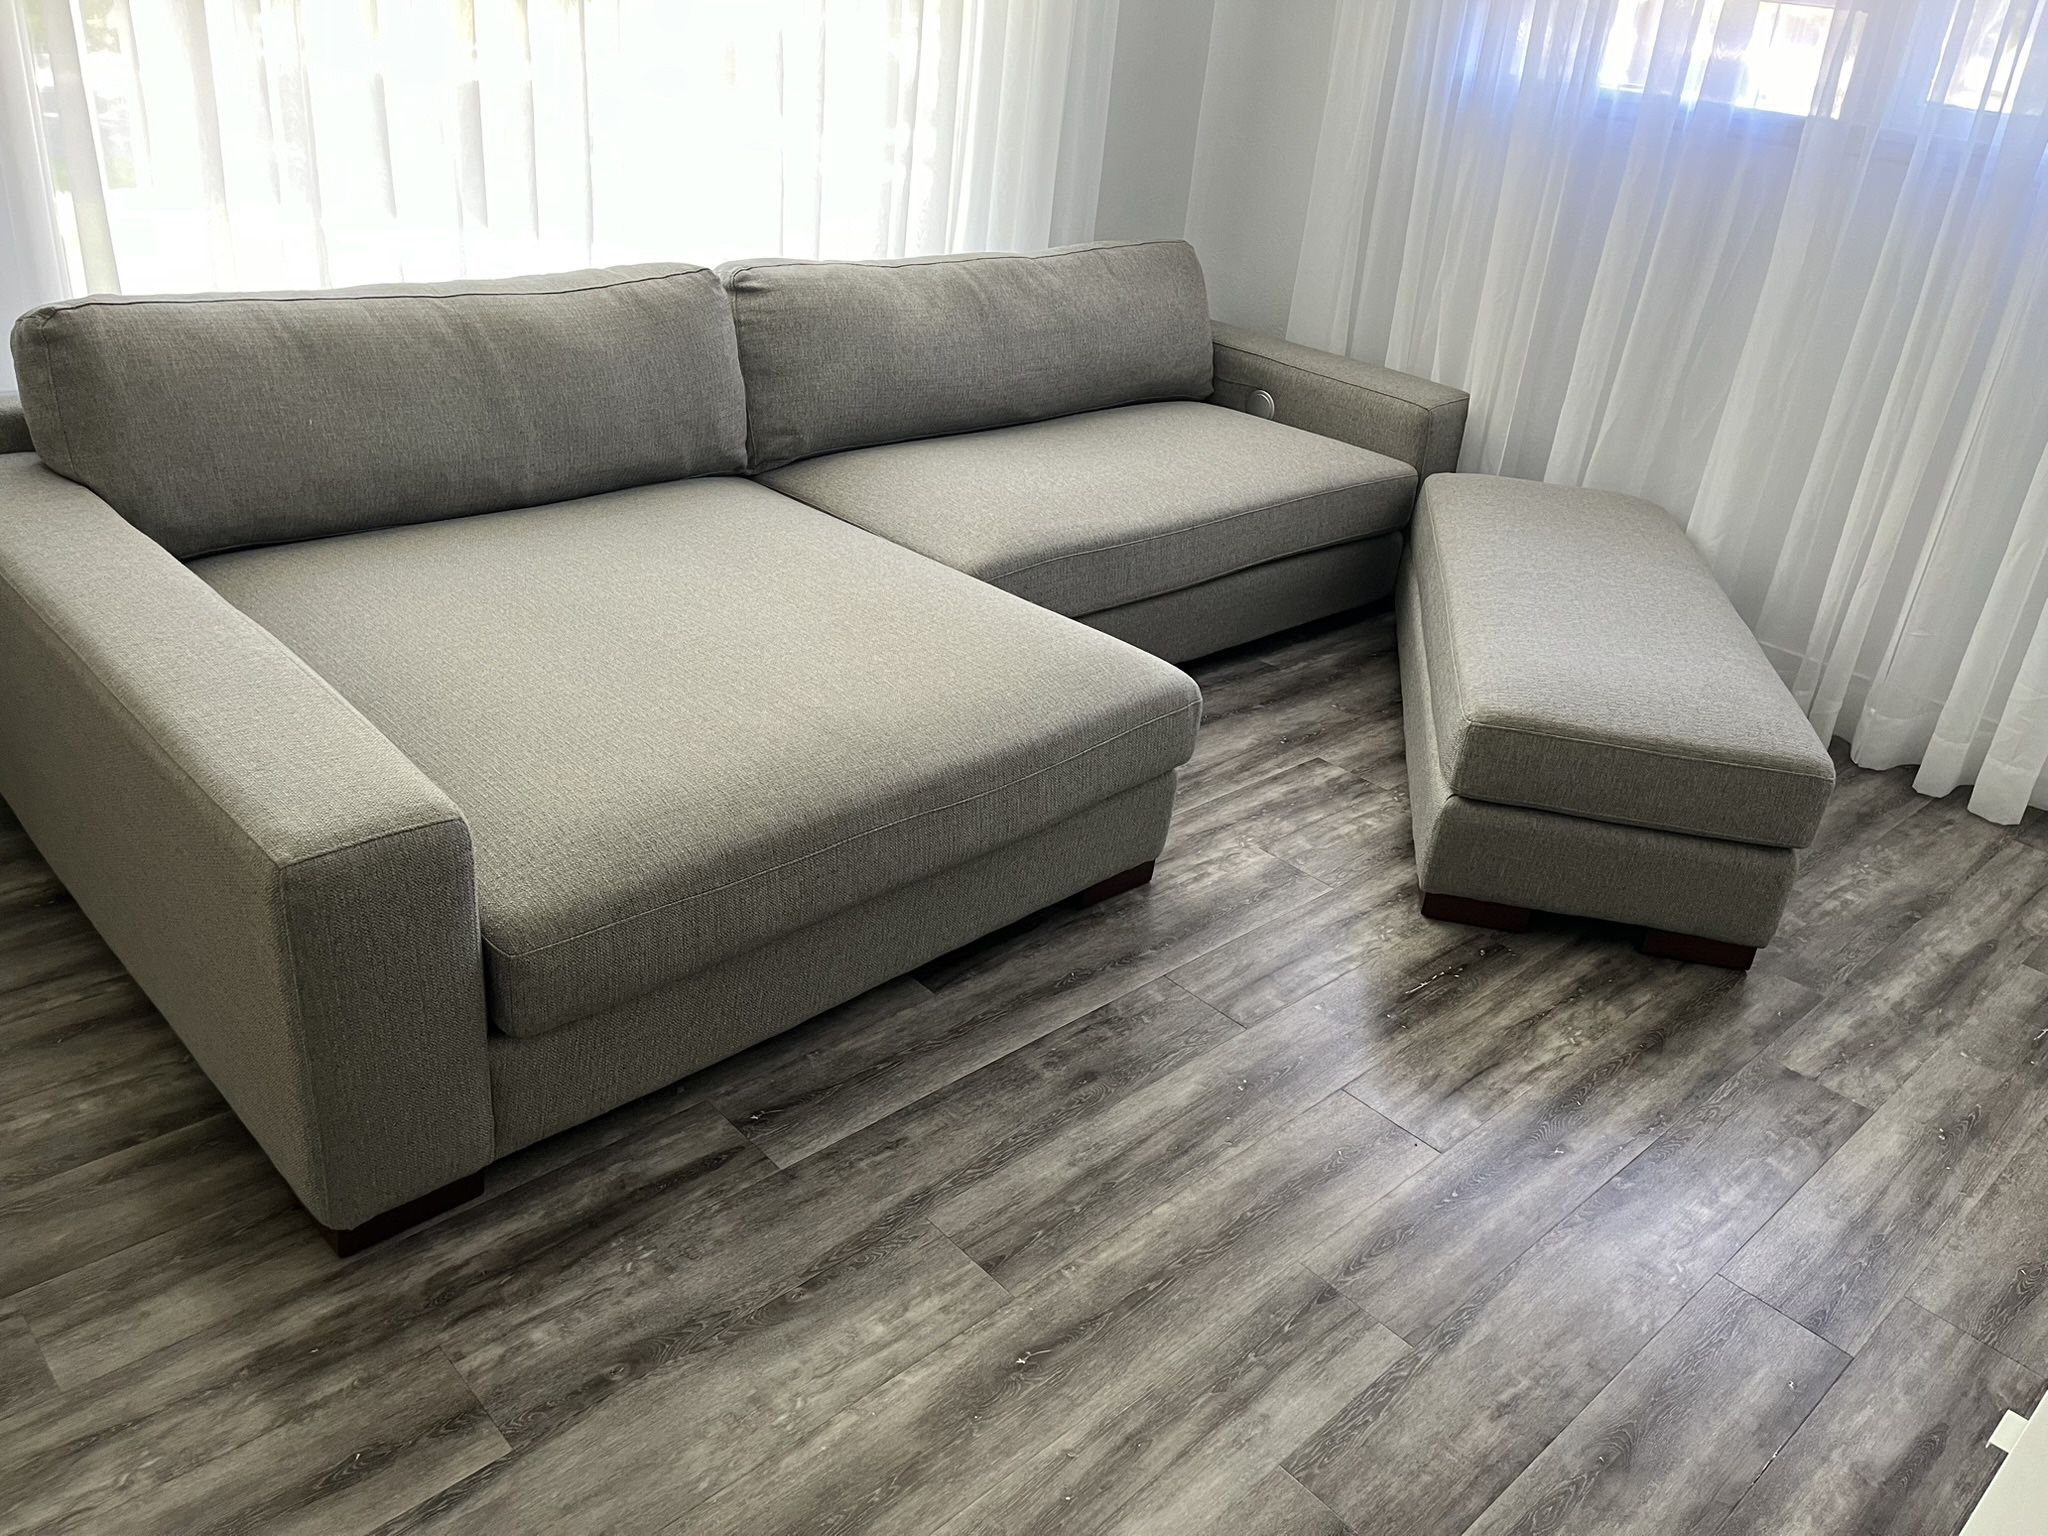 Large Costco Sectional with Chaise and Ottoman